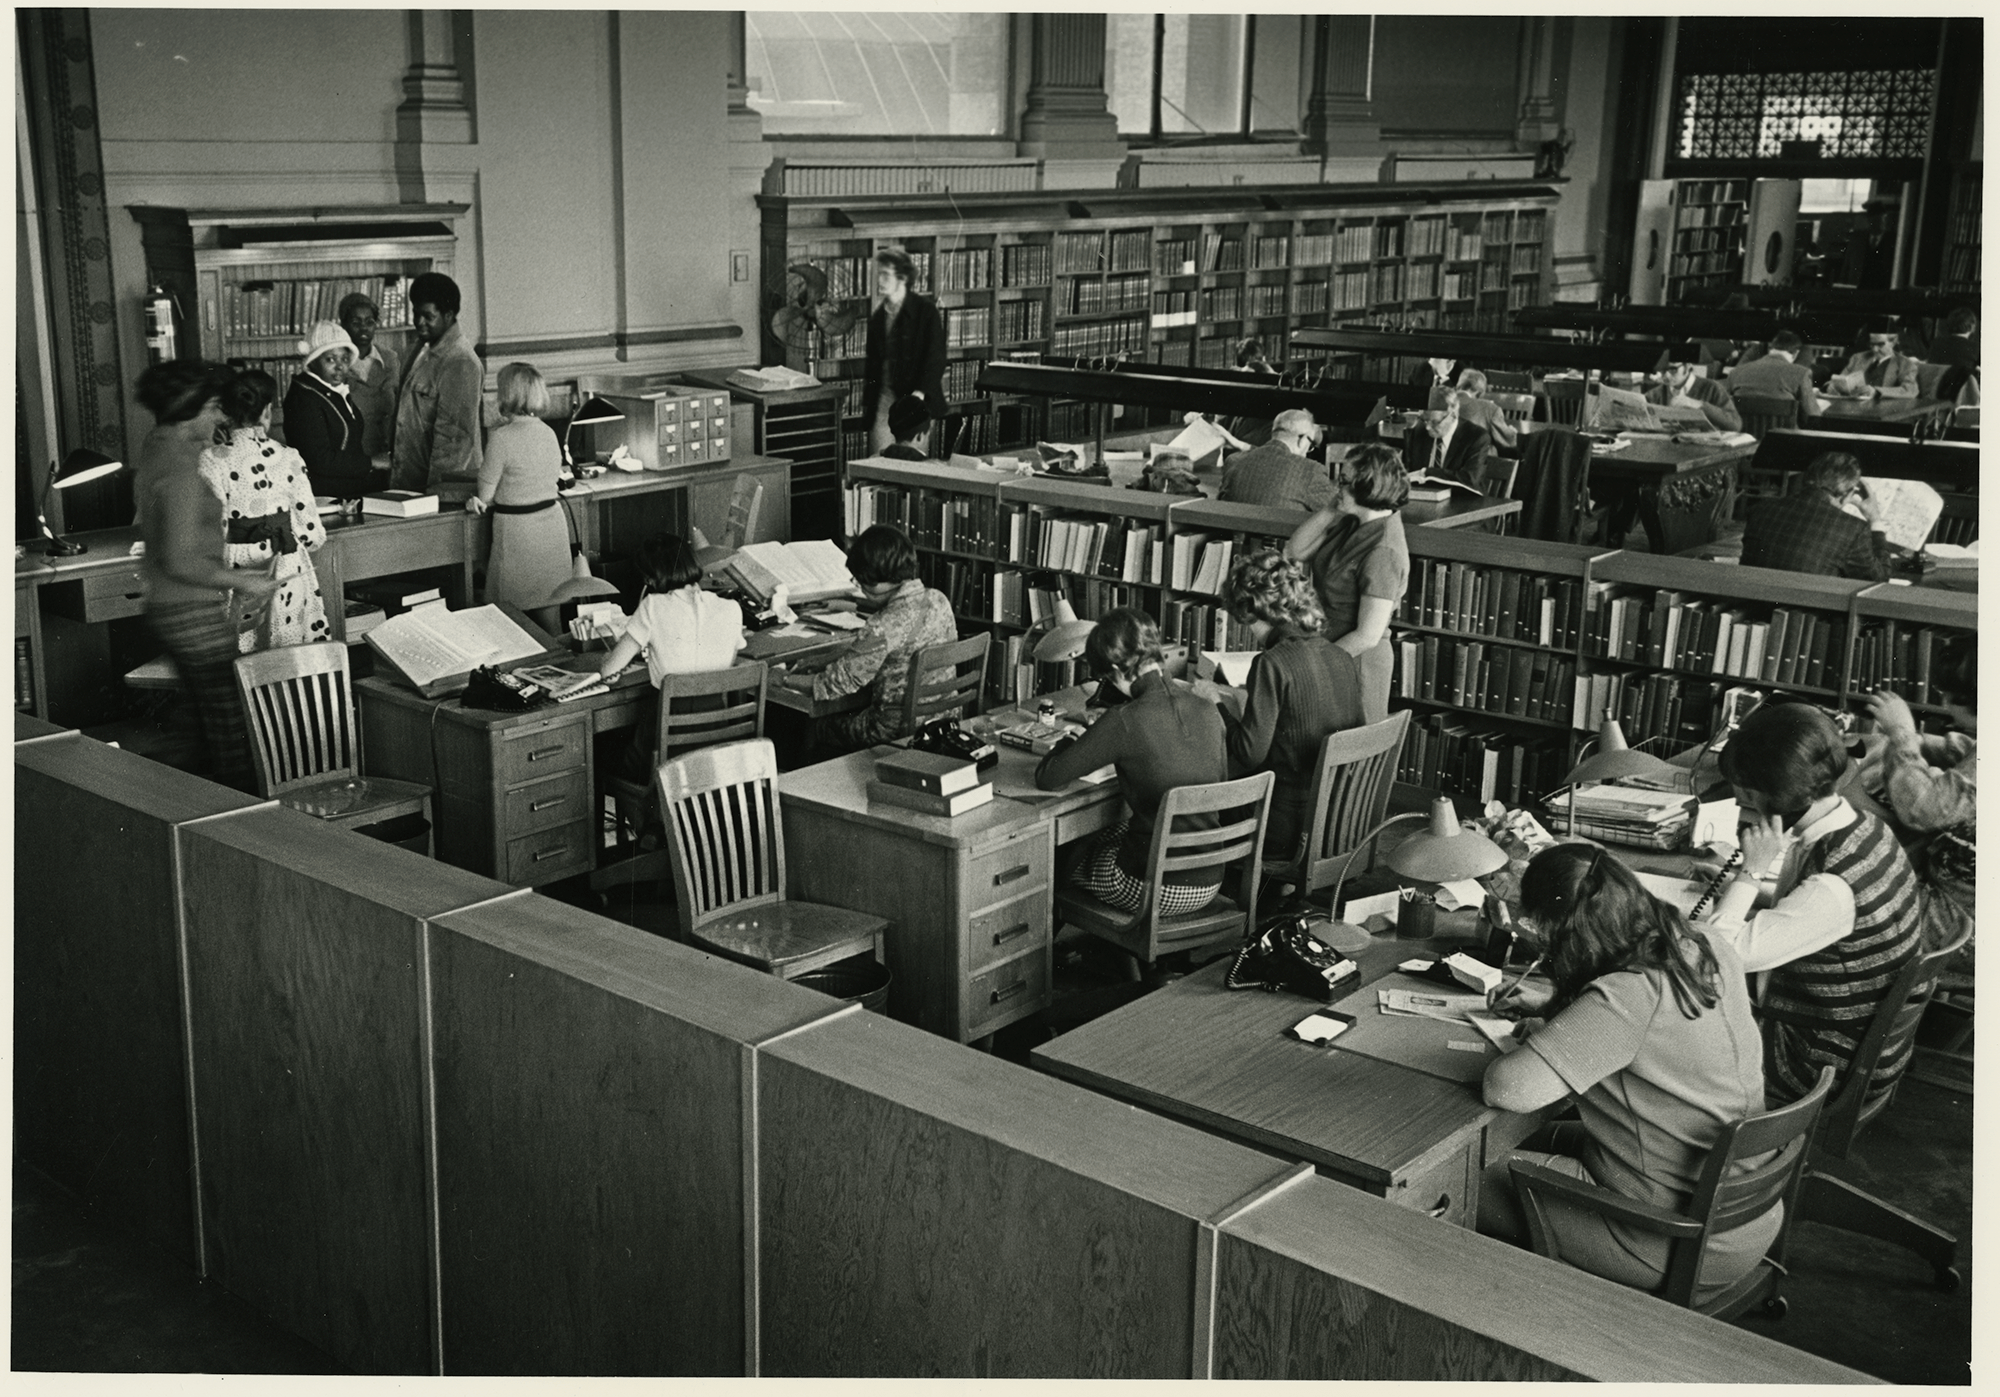 Circa 1970, Central Library reference department.